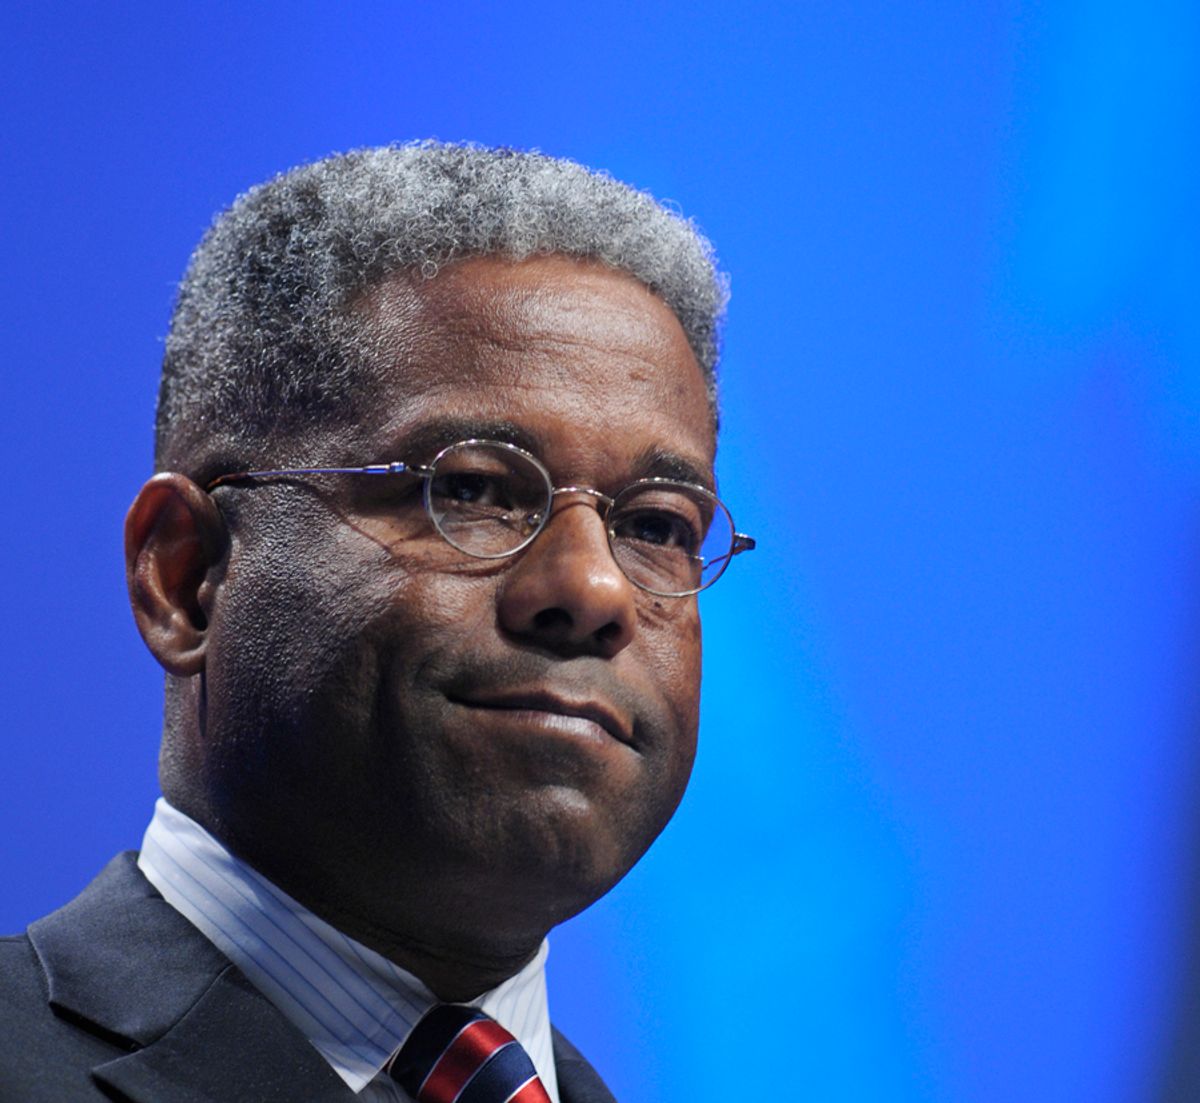 Rep. Allen West, R-Fla., speaks at the Conservative Political Action Conference (CPAC) in Washington, Saturday, Feb. 12, 2011. (AP Photo/Cliff Owen) (Cliff Owen)